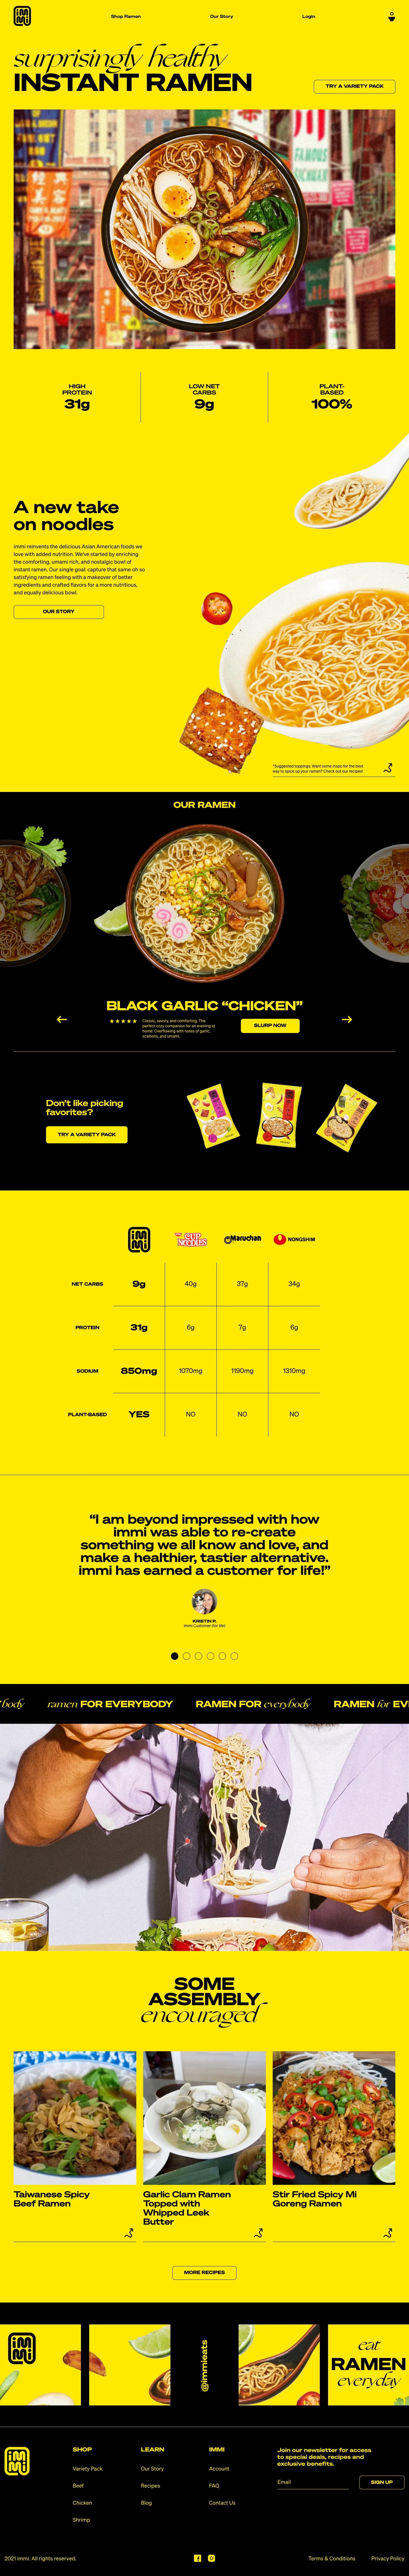 immi Landing Page Example: The world’s first low-carb, high-protein instant ramen.